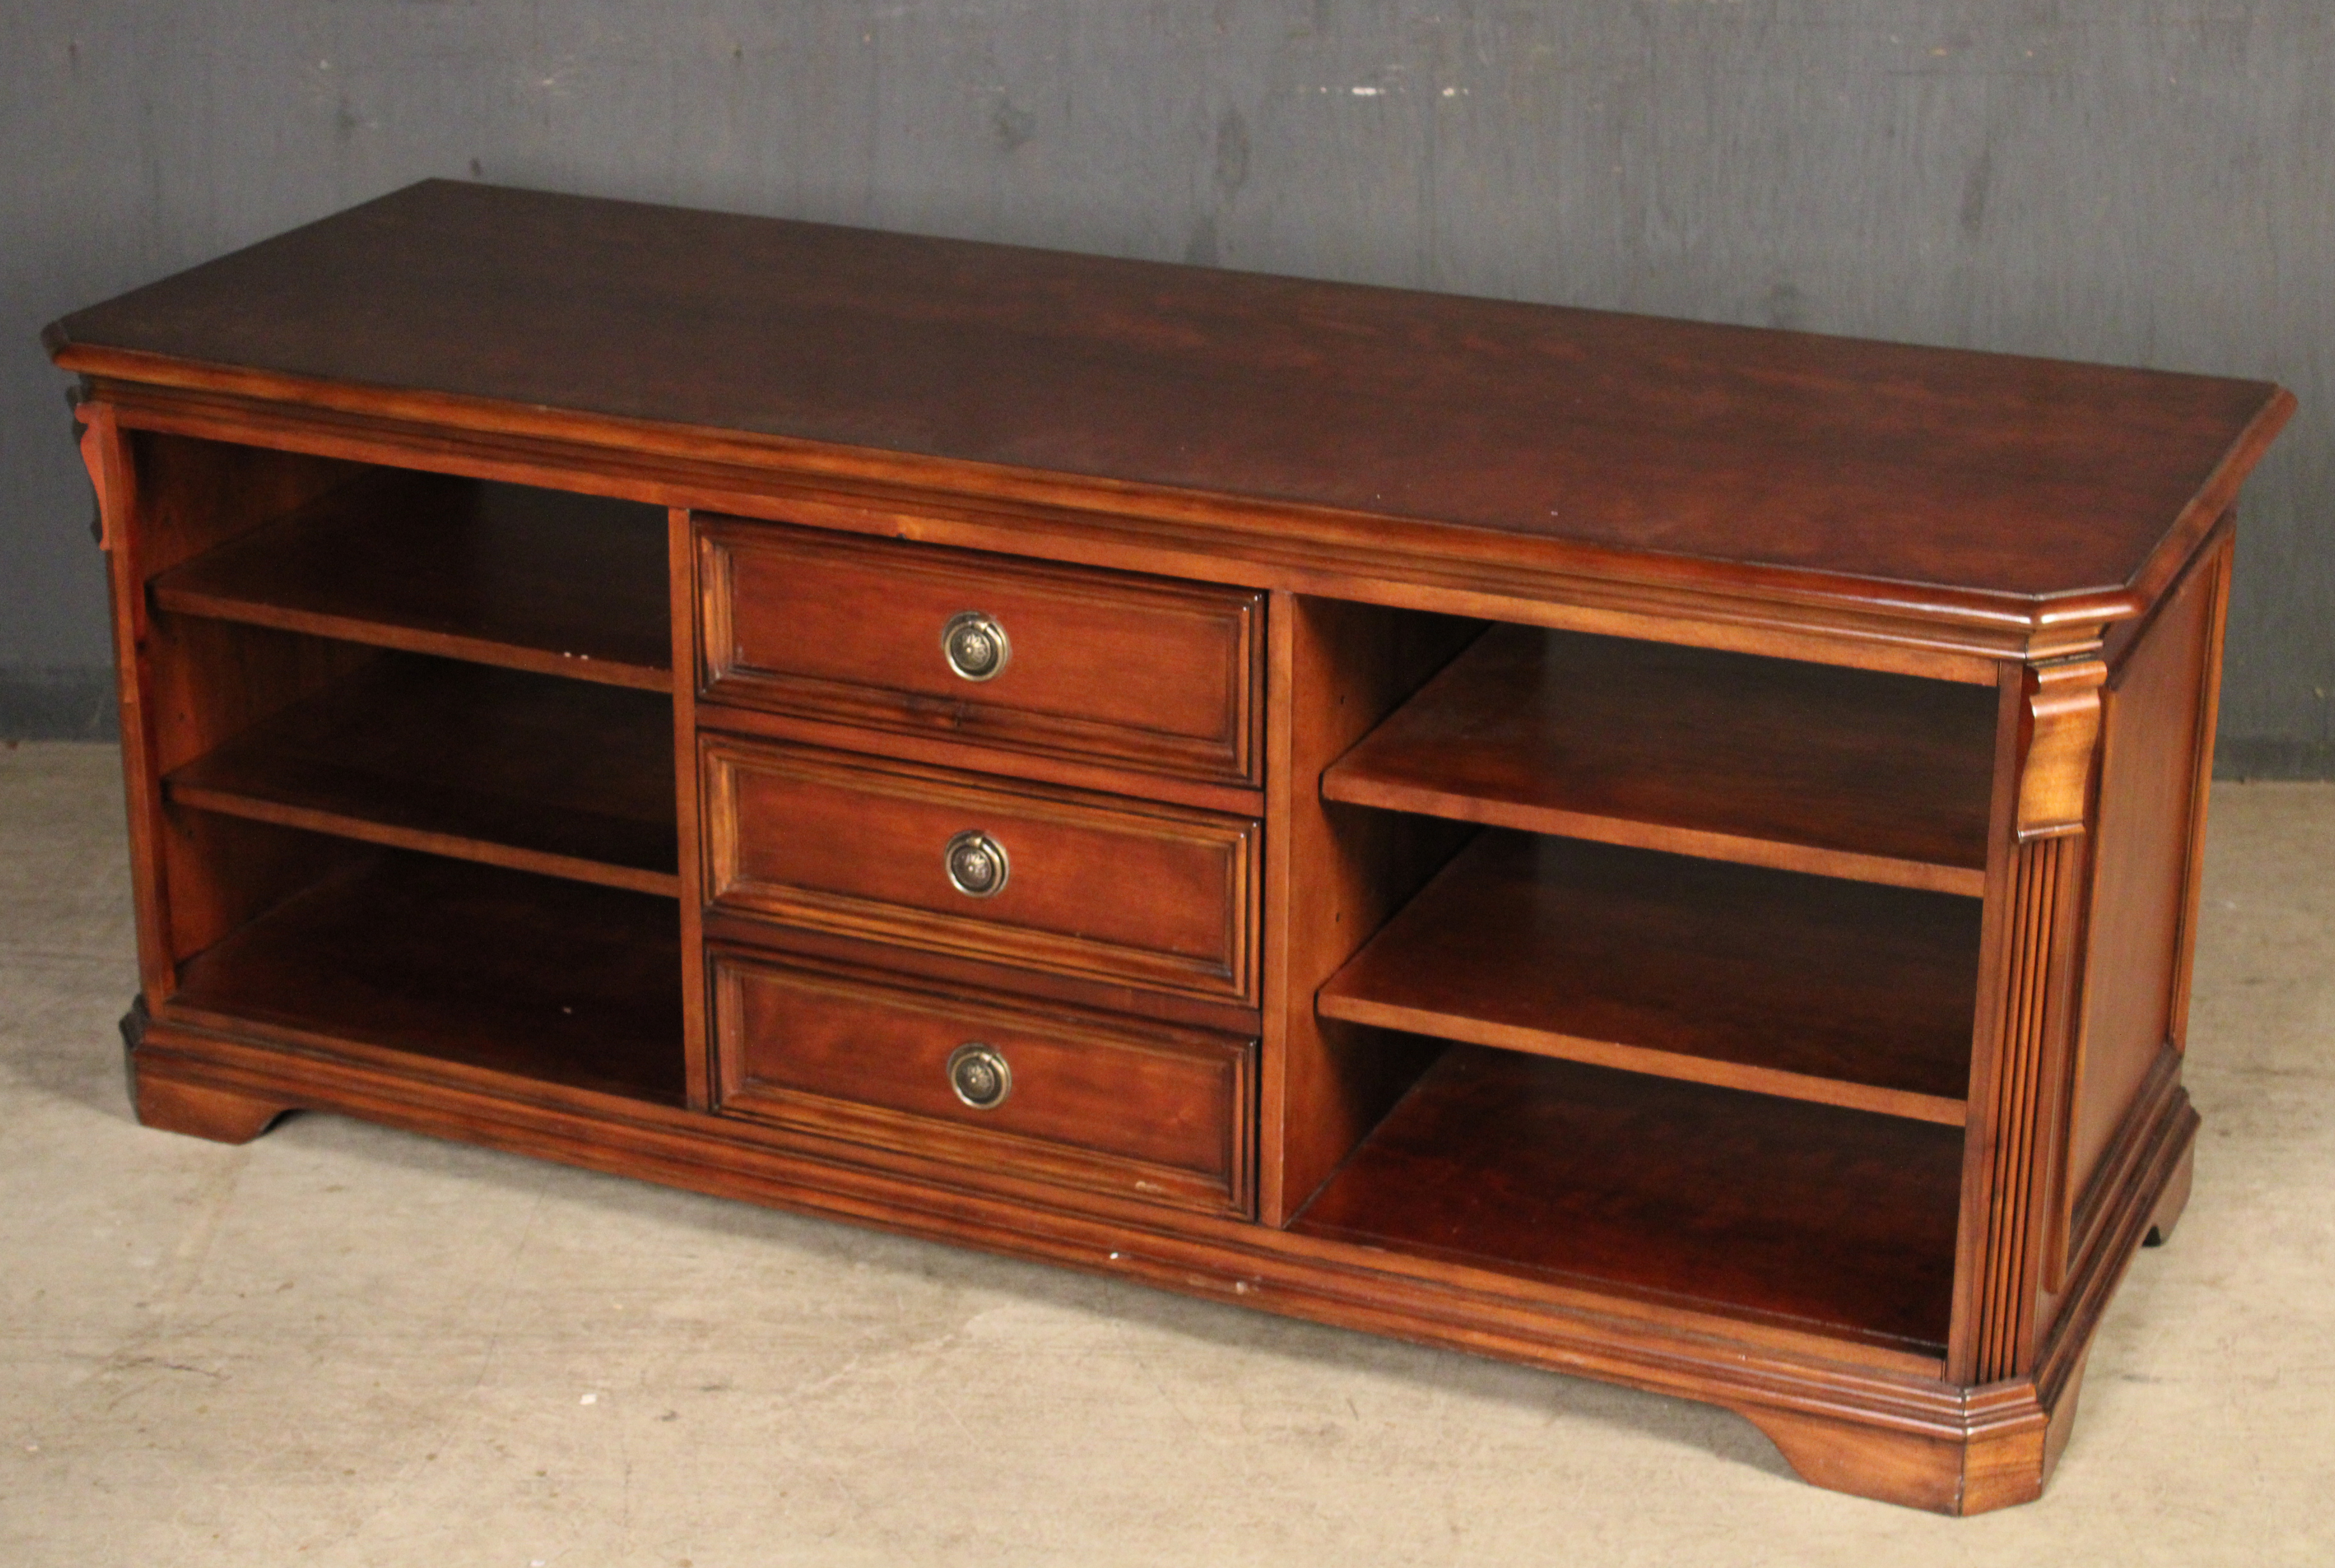 LOW CONSOLE BY HOOKER 3 DRAWER